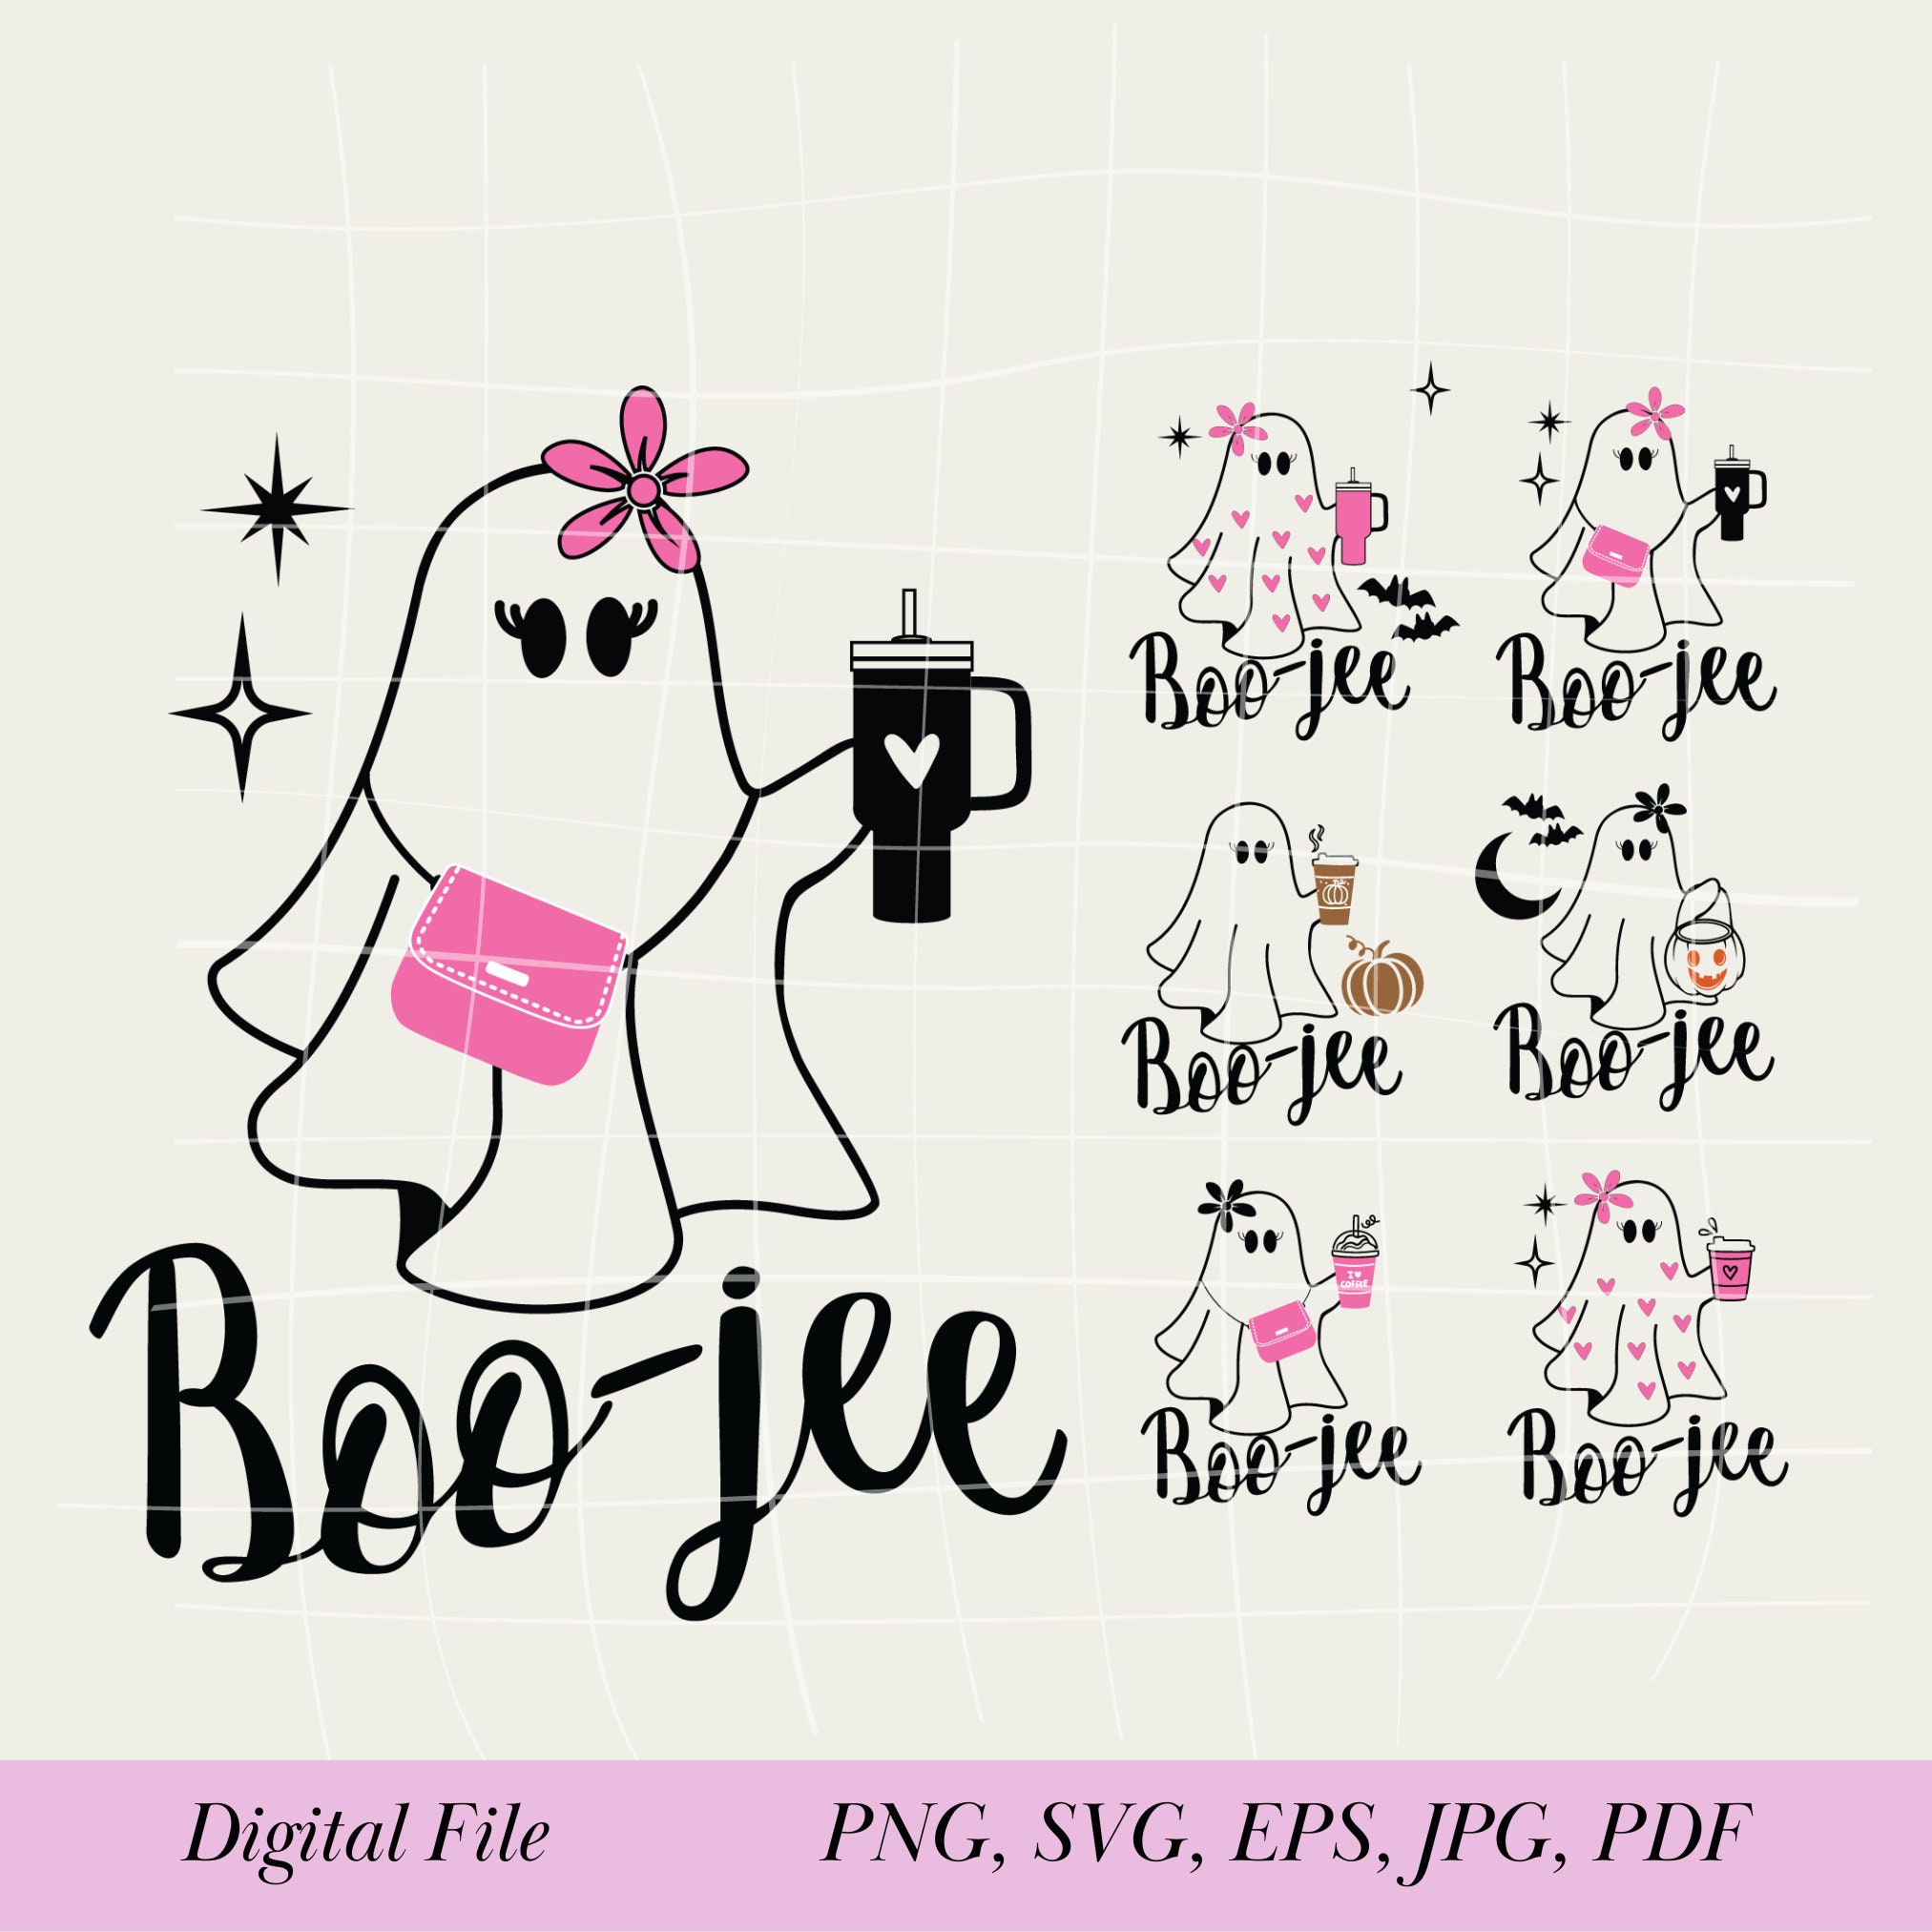 Boo-jee Stanley topper – Berry's Vintage Boutique